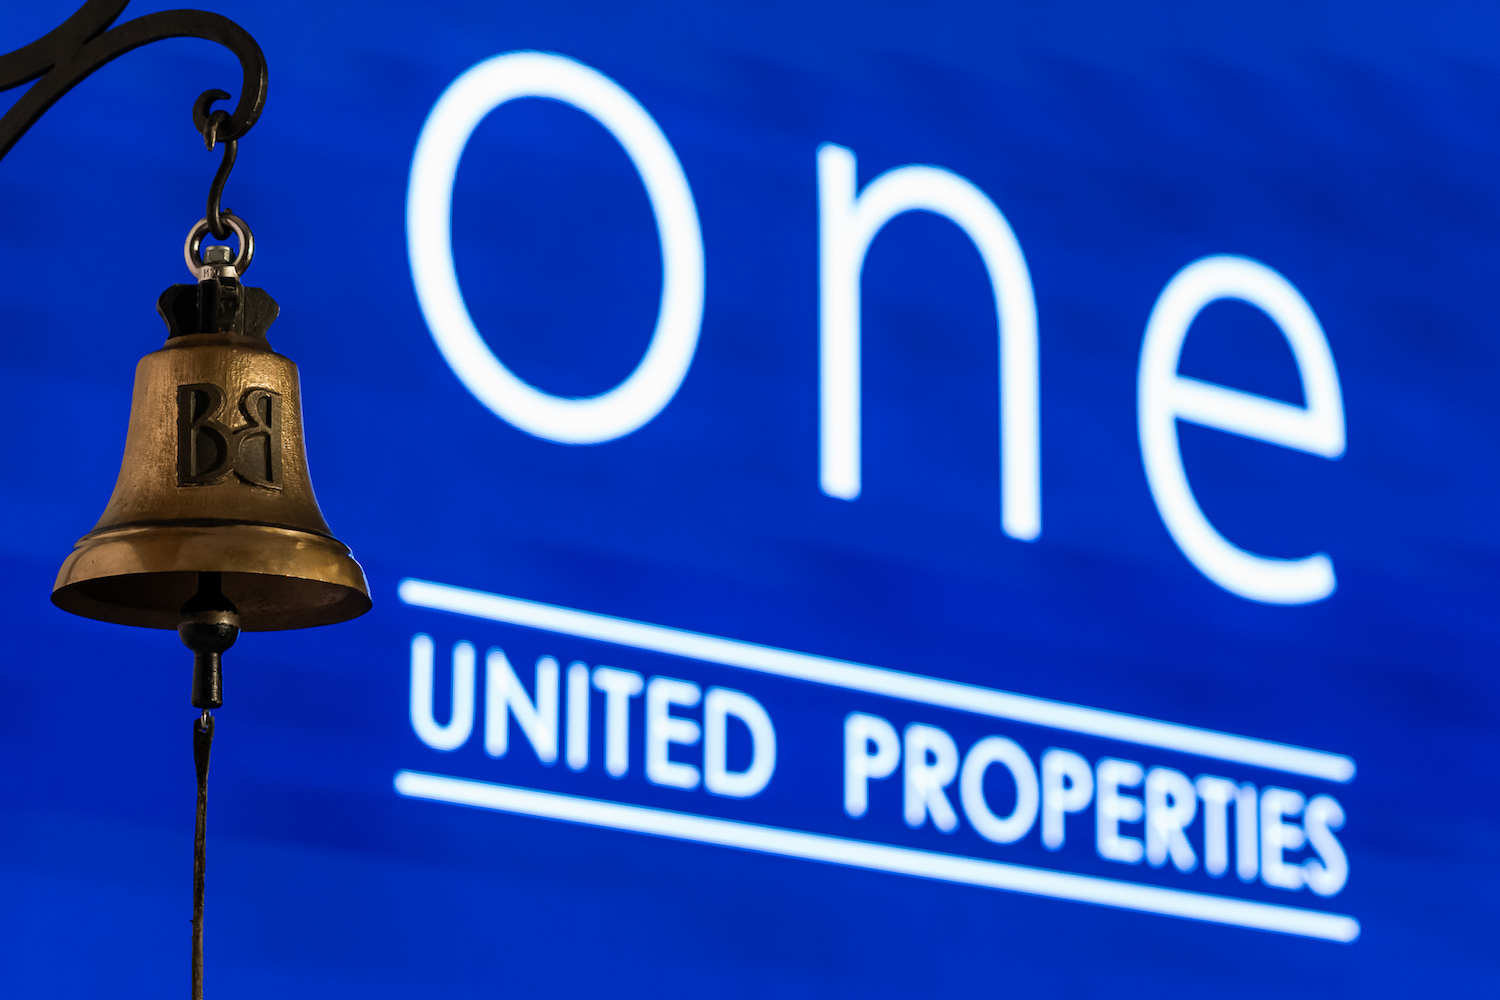 One United Properties significant shareholders place 234 million shares to local and international institutional investors